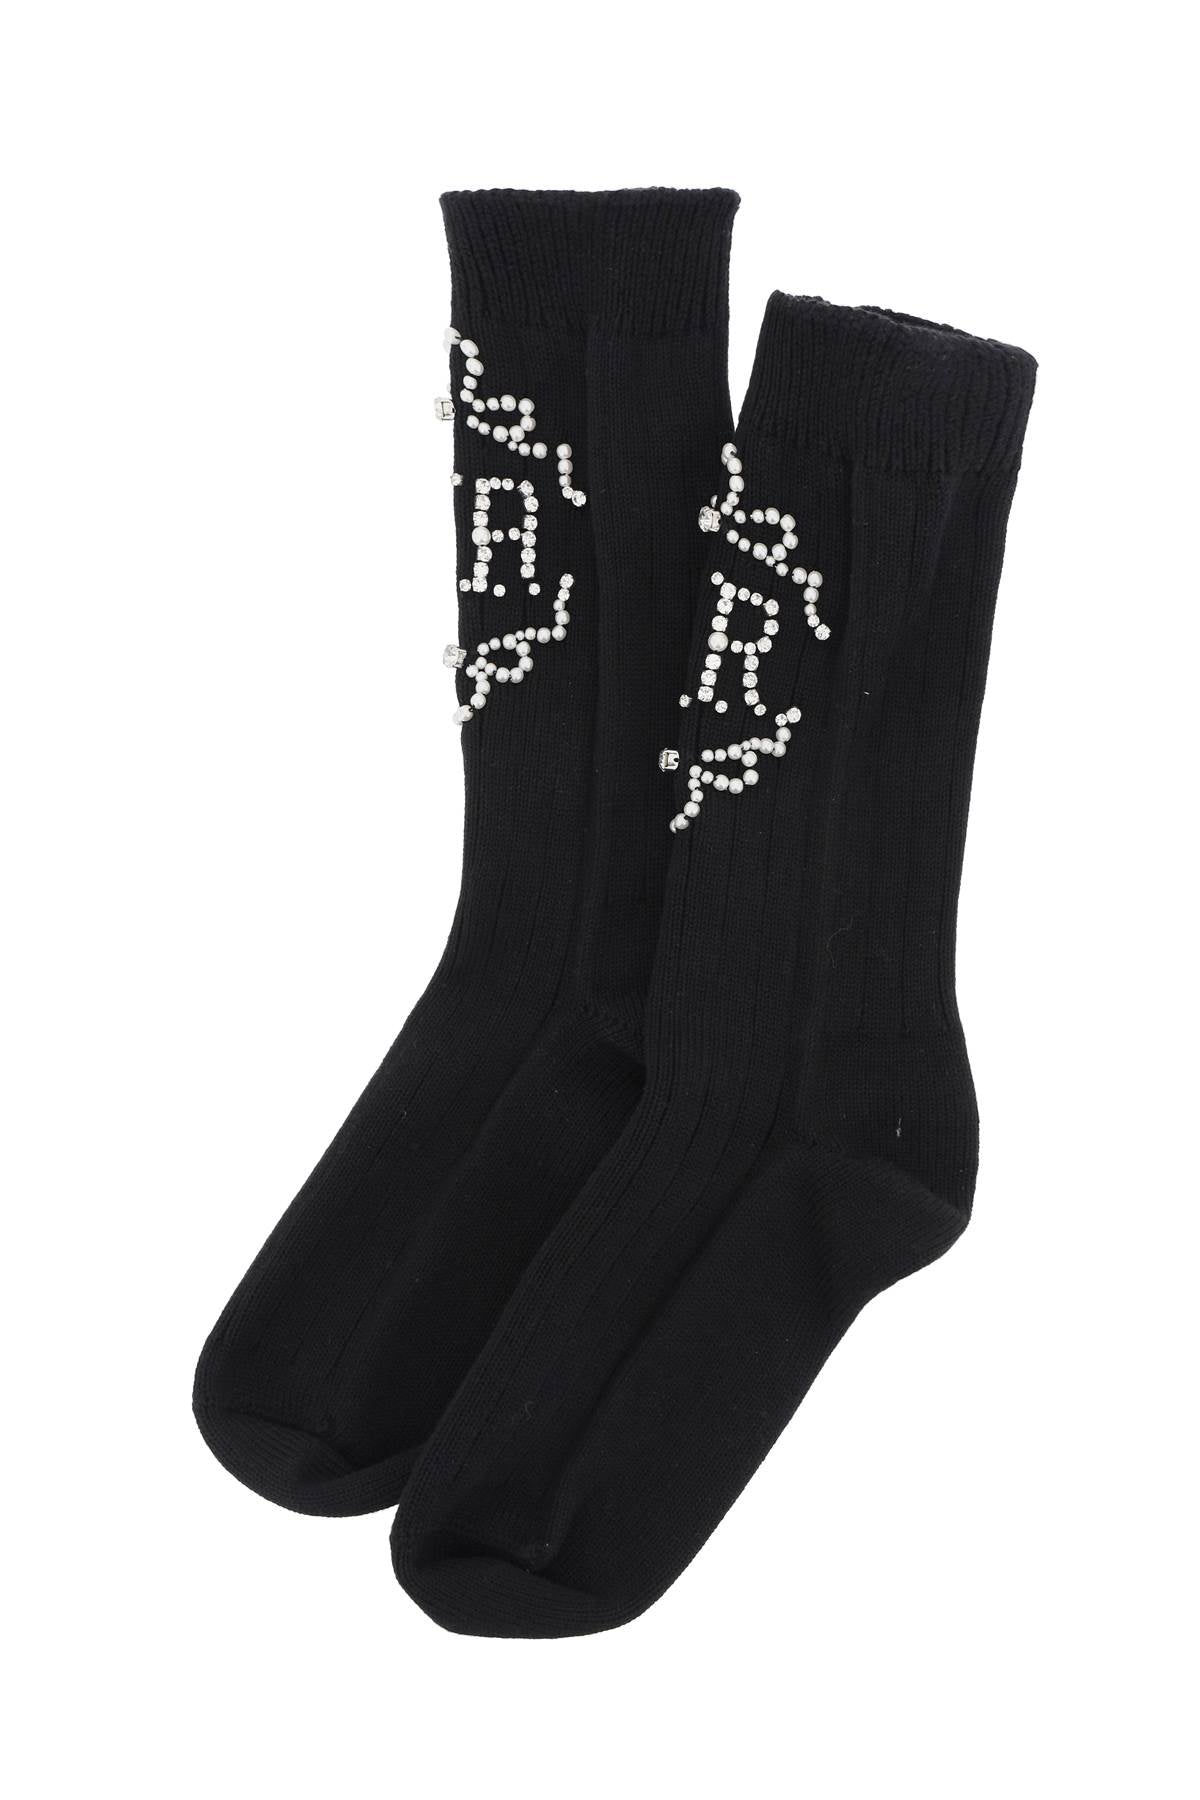 Simone rocha sr socks with pearls and crystals-1